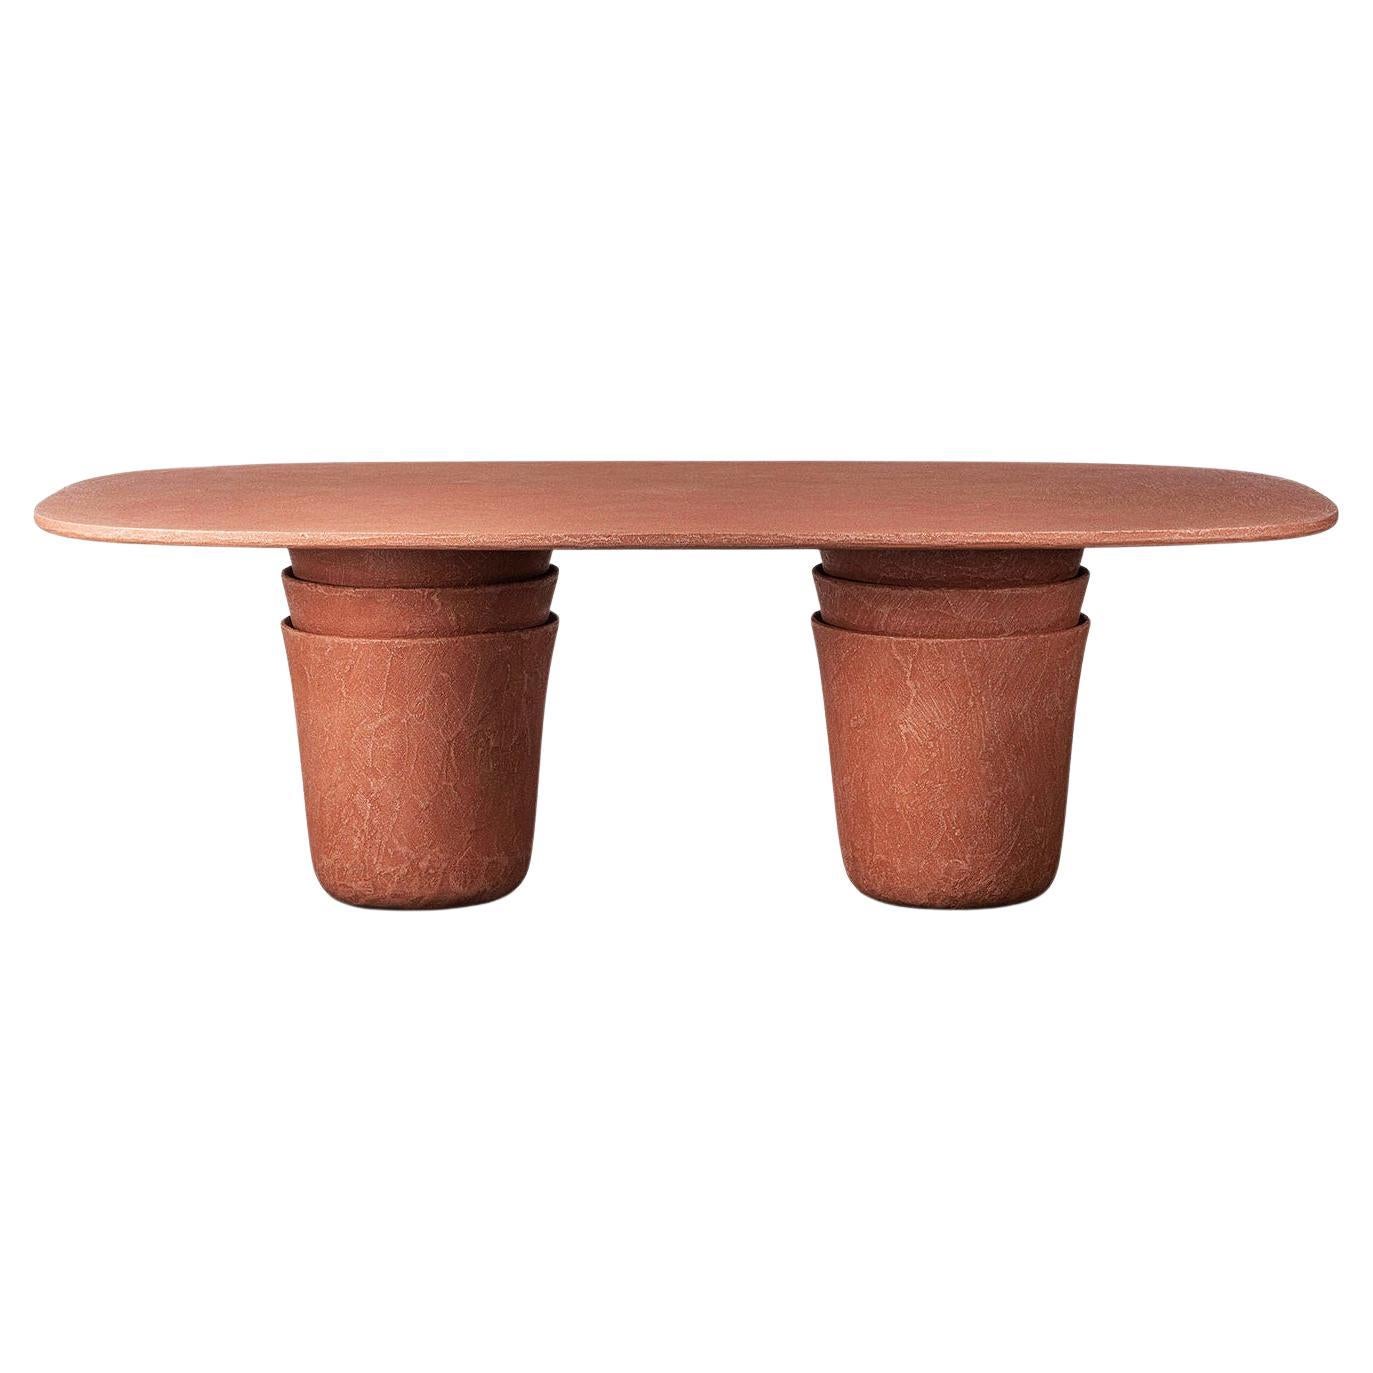 Vick Coral Large Outdoor Table For Sale